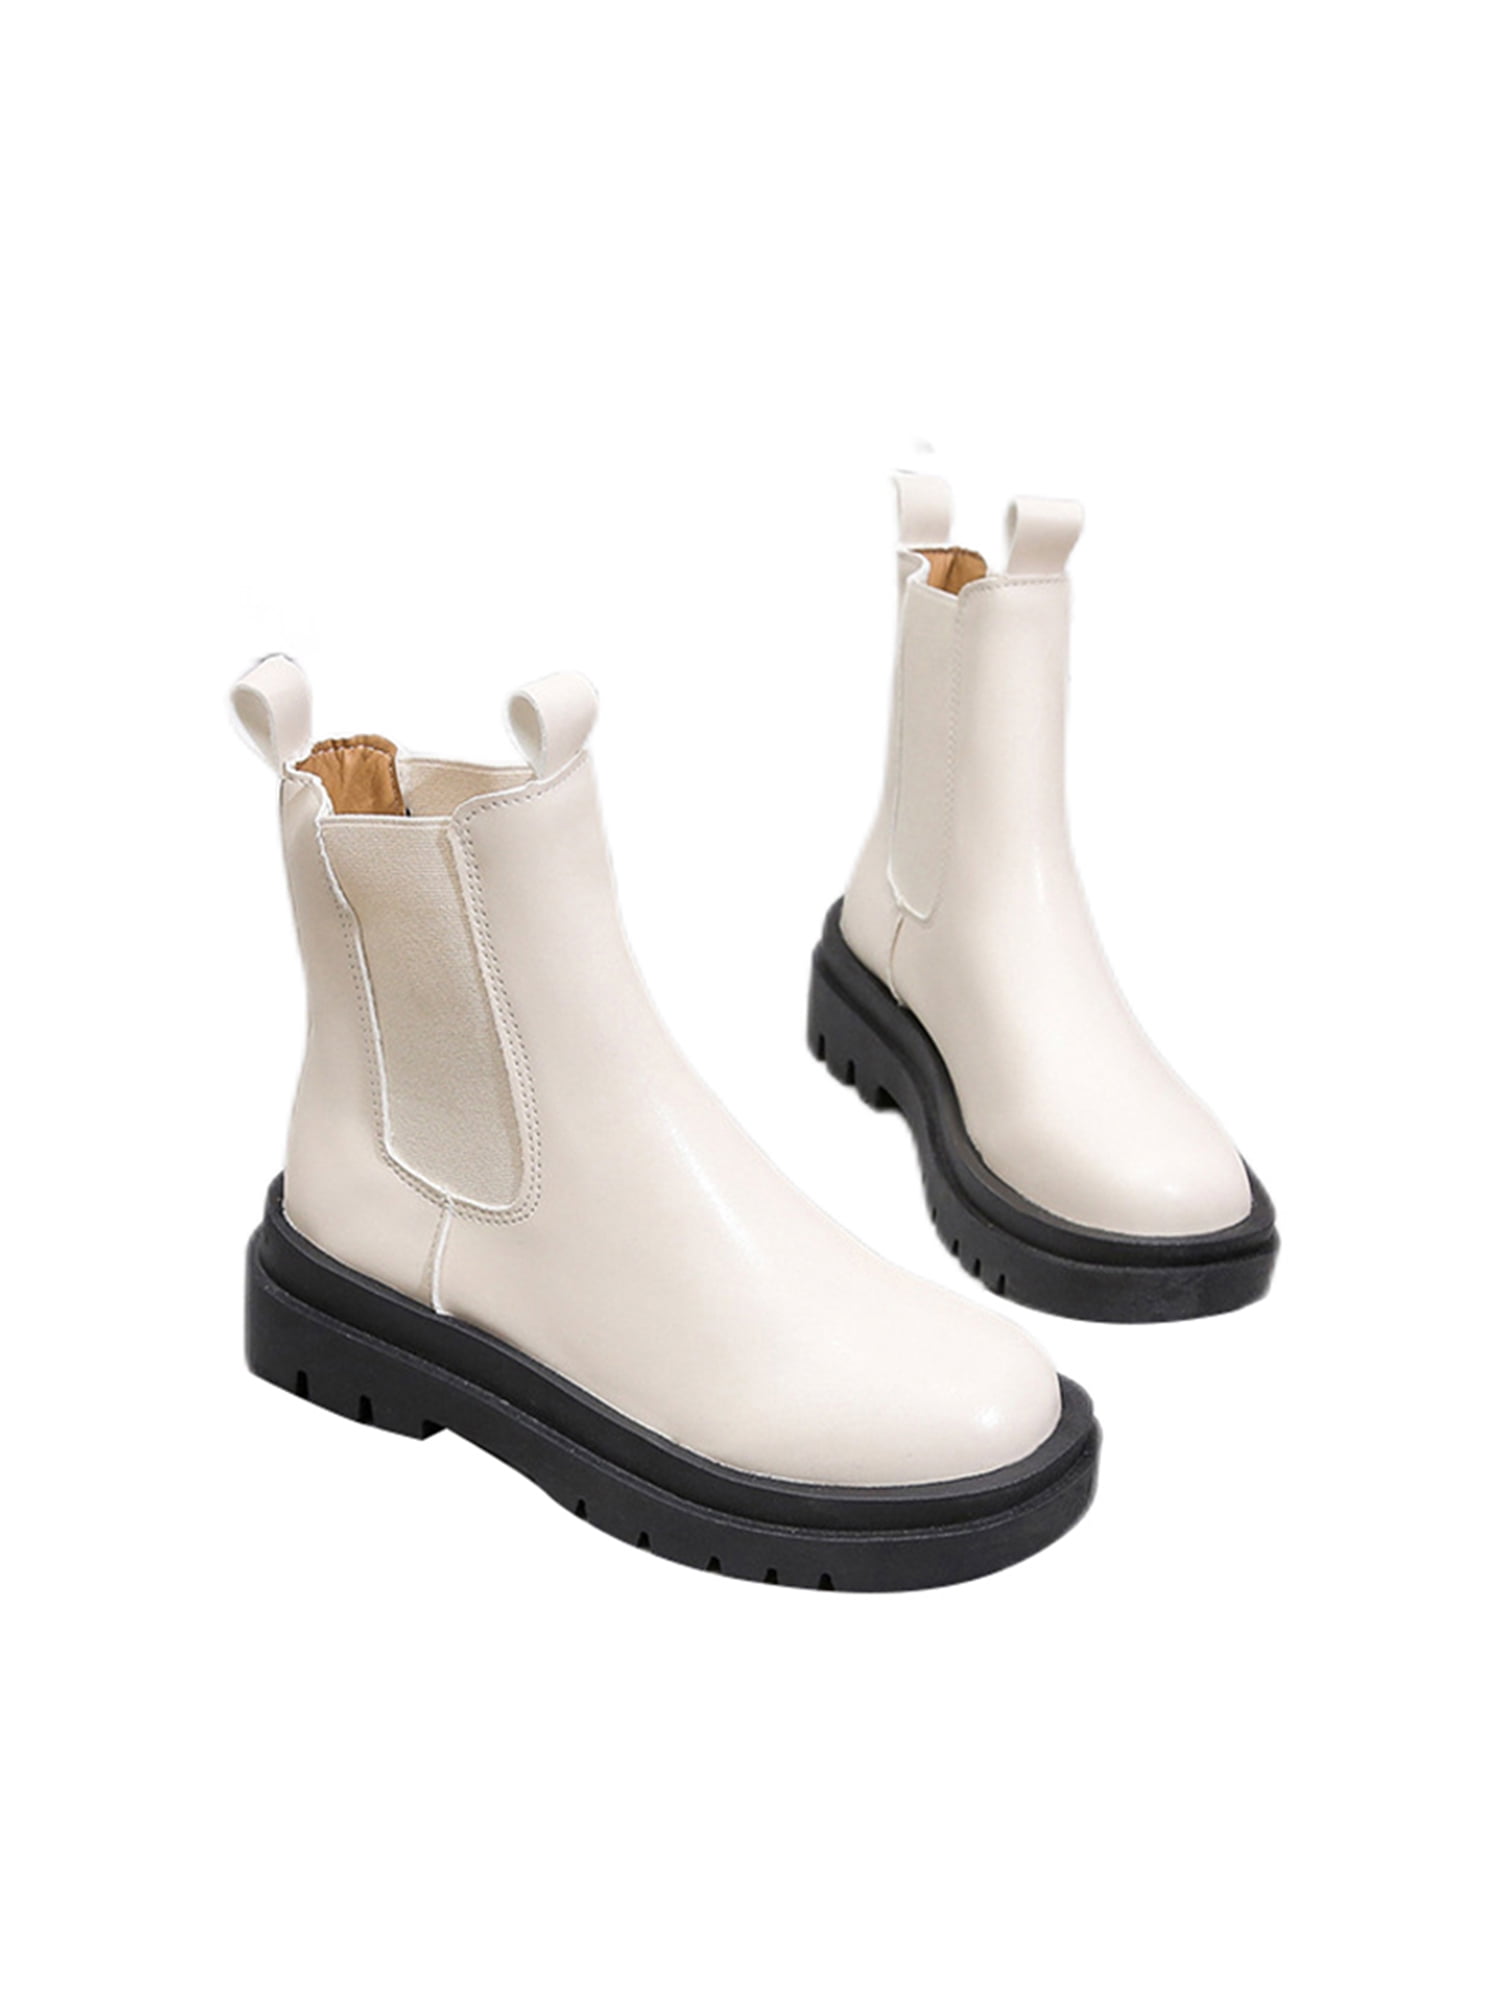 Hub dårligt rolle Rotosw Womens Work Shoes Elastic Chelsea Boot Waterproof Ankle Boots Anti  Slip Round Toe Booties Office Comfort White 7.5 - Walmart.com